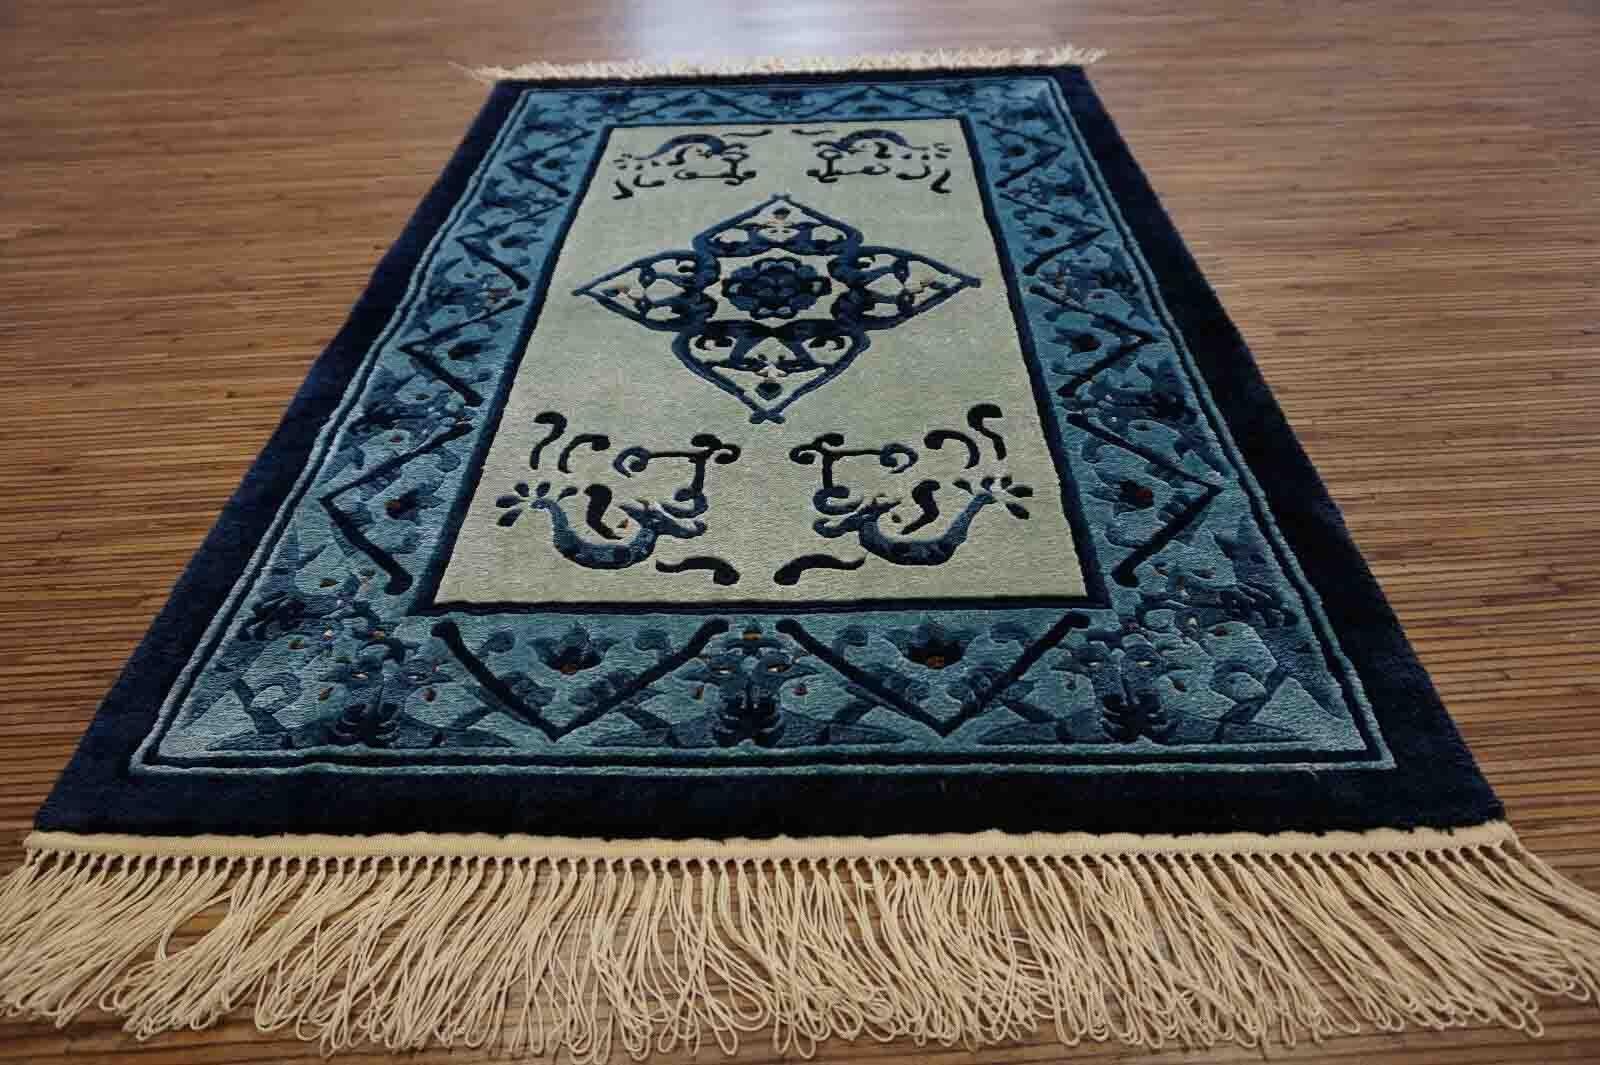 Handmade vintage Art Deco Chinese rug made in silk with birds design. The rug is in sea green and bright blue shades. It is from the end of 20th century in original good condition.

-condition: original good,

-circa: 1970s,

-size: 2' x 3.1'